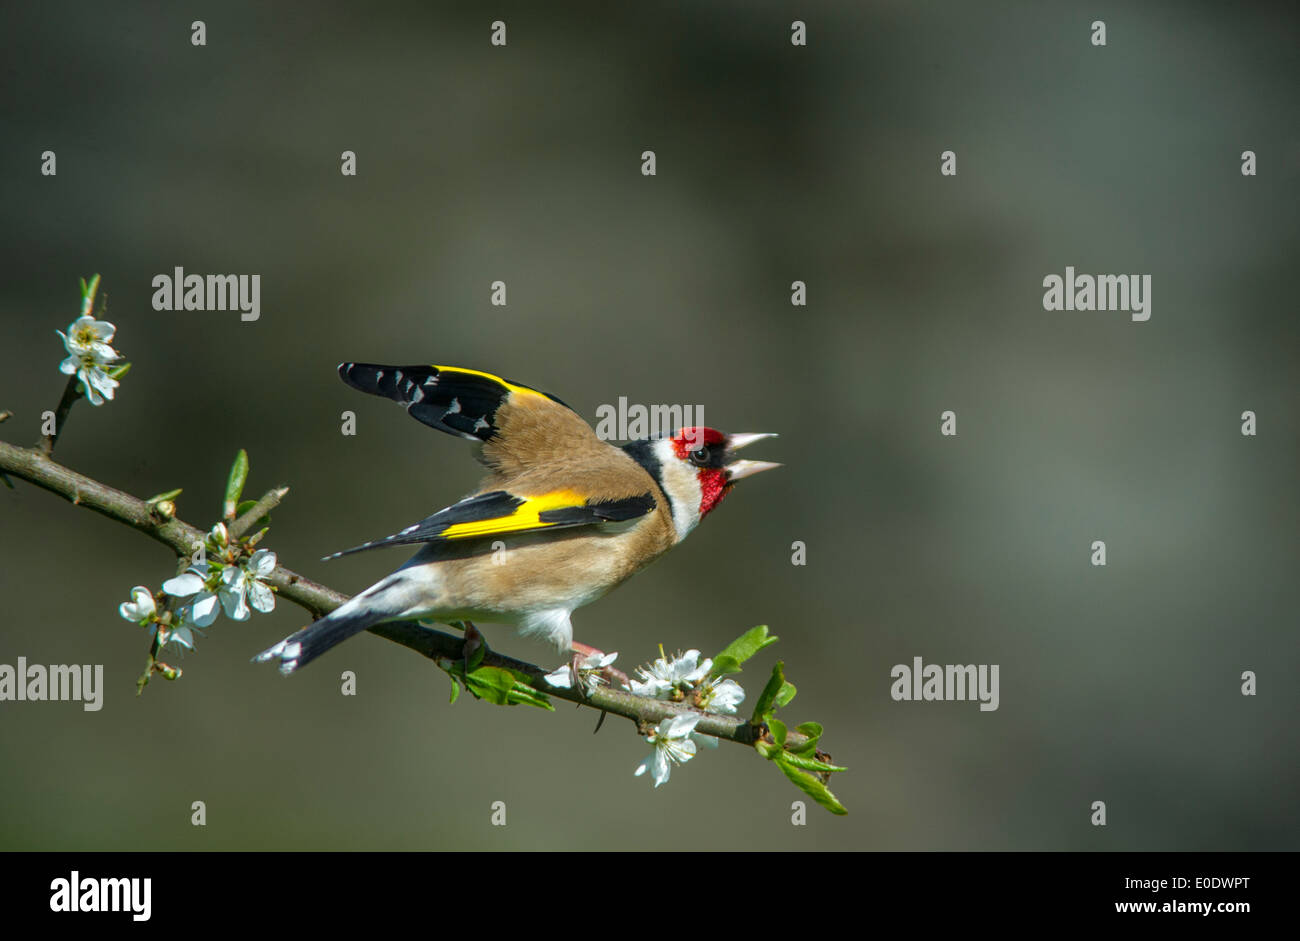 Goldfinch,Carduelis carduelis showing aggression Stock Photo